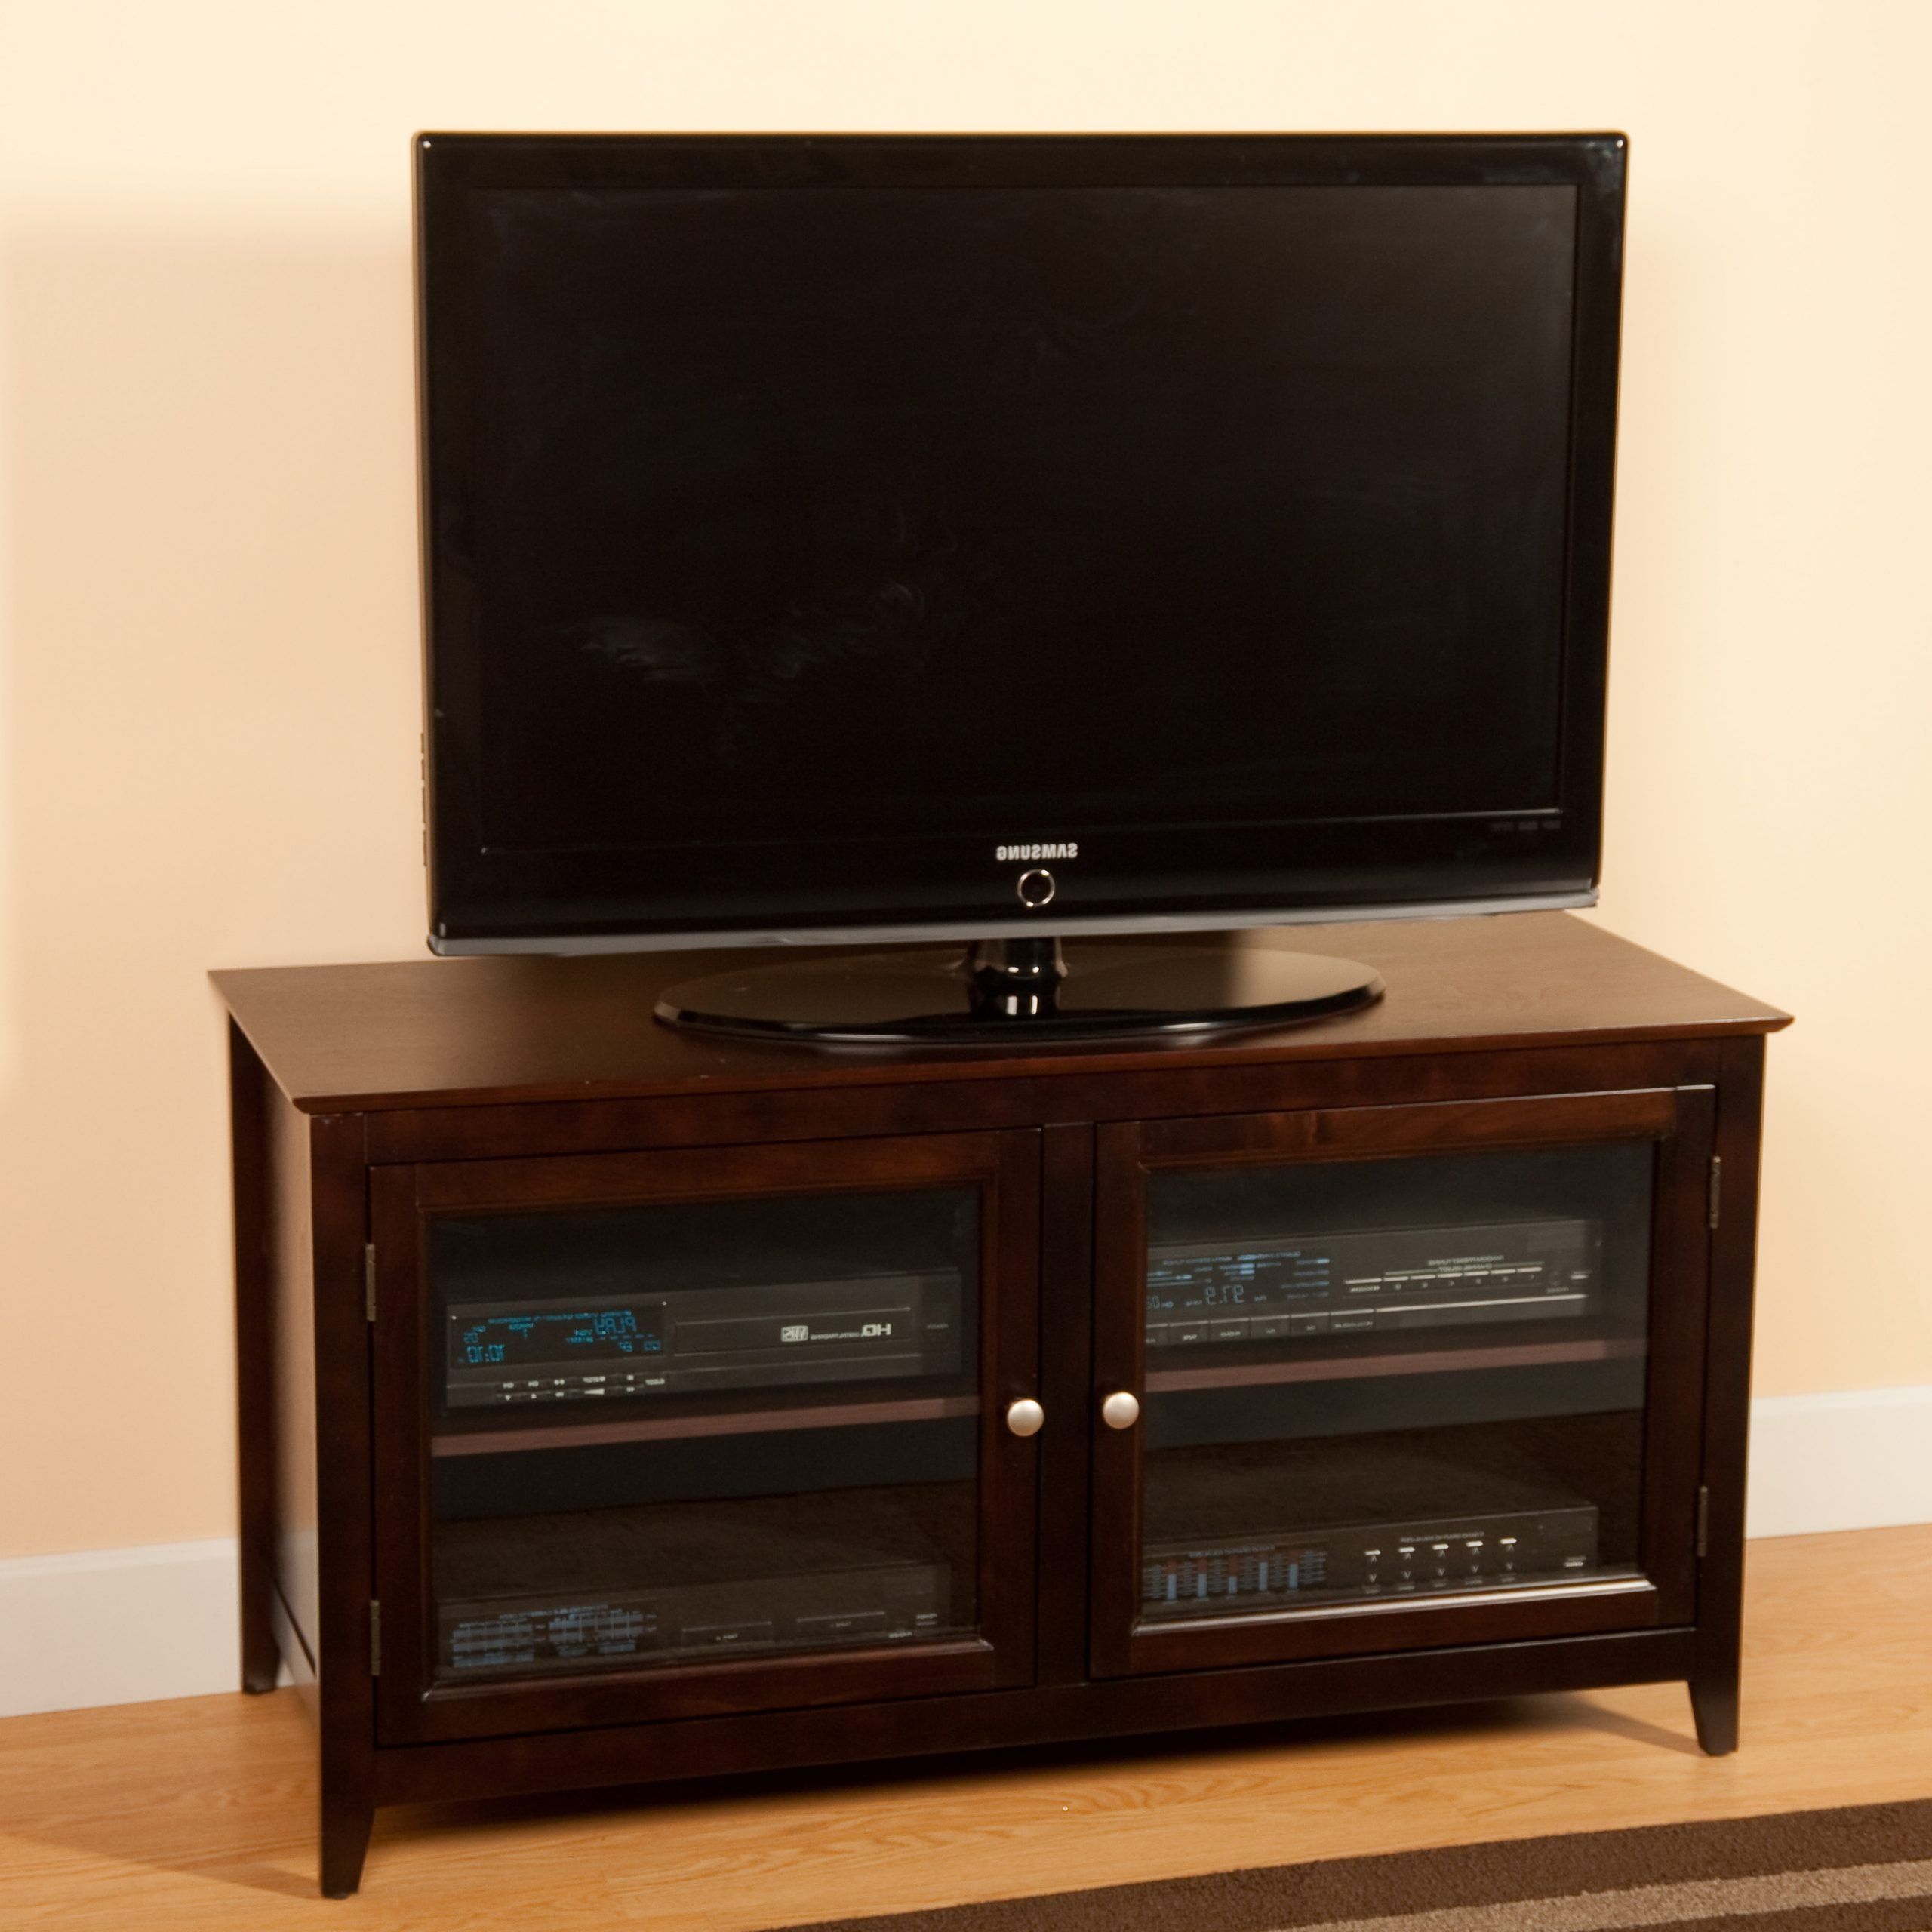 Fashionable Premier 48 Inch Tv Stand At Hayneedle For Antea Tv Stands For Tvs Up To 48" (View 8 of 25)